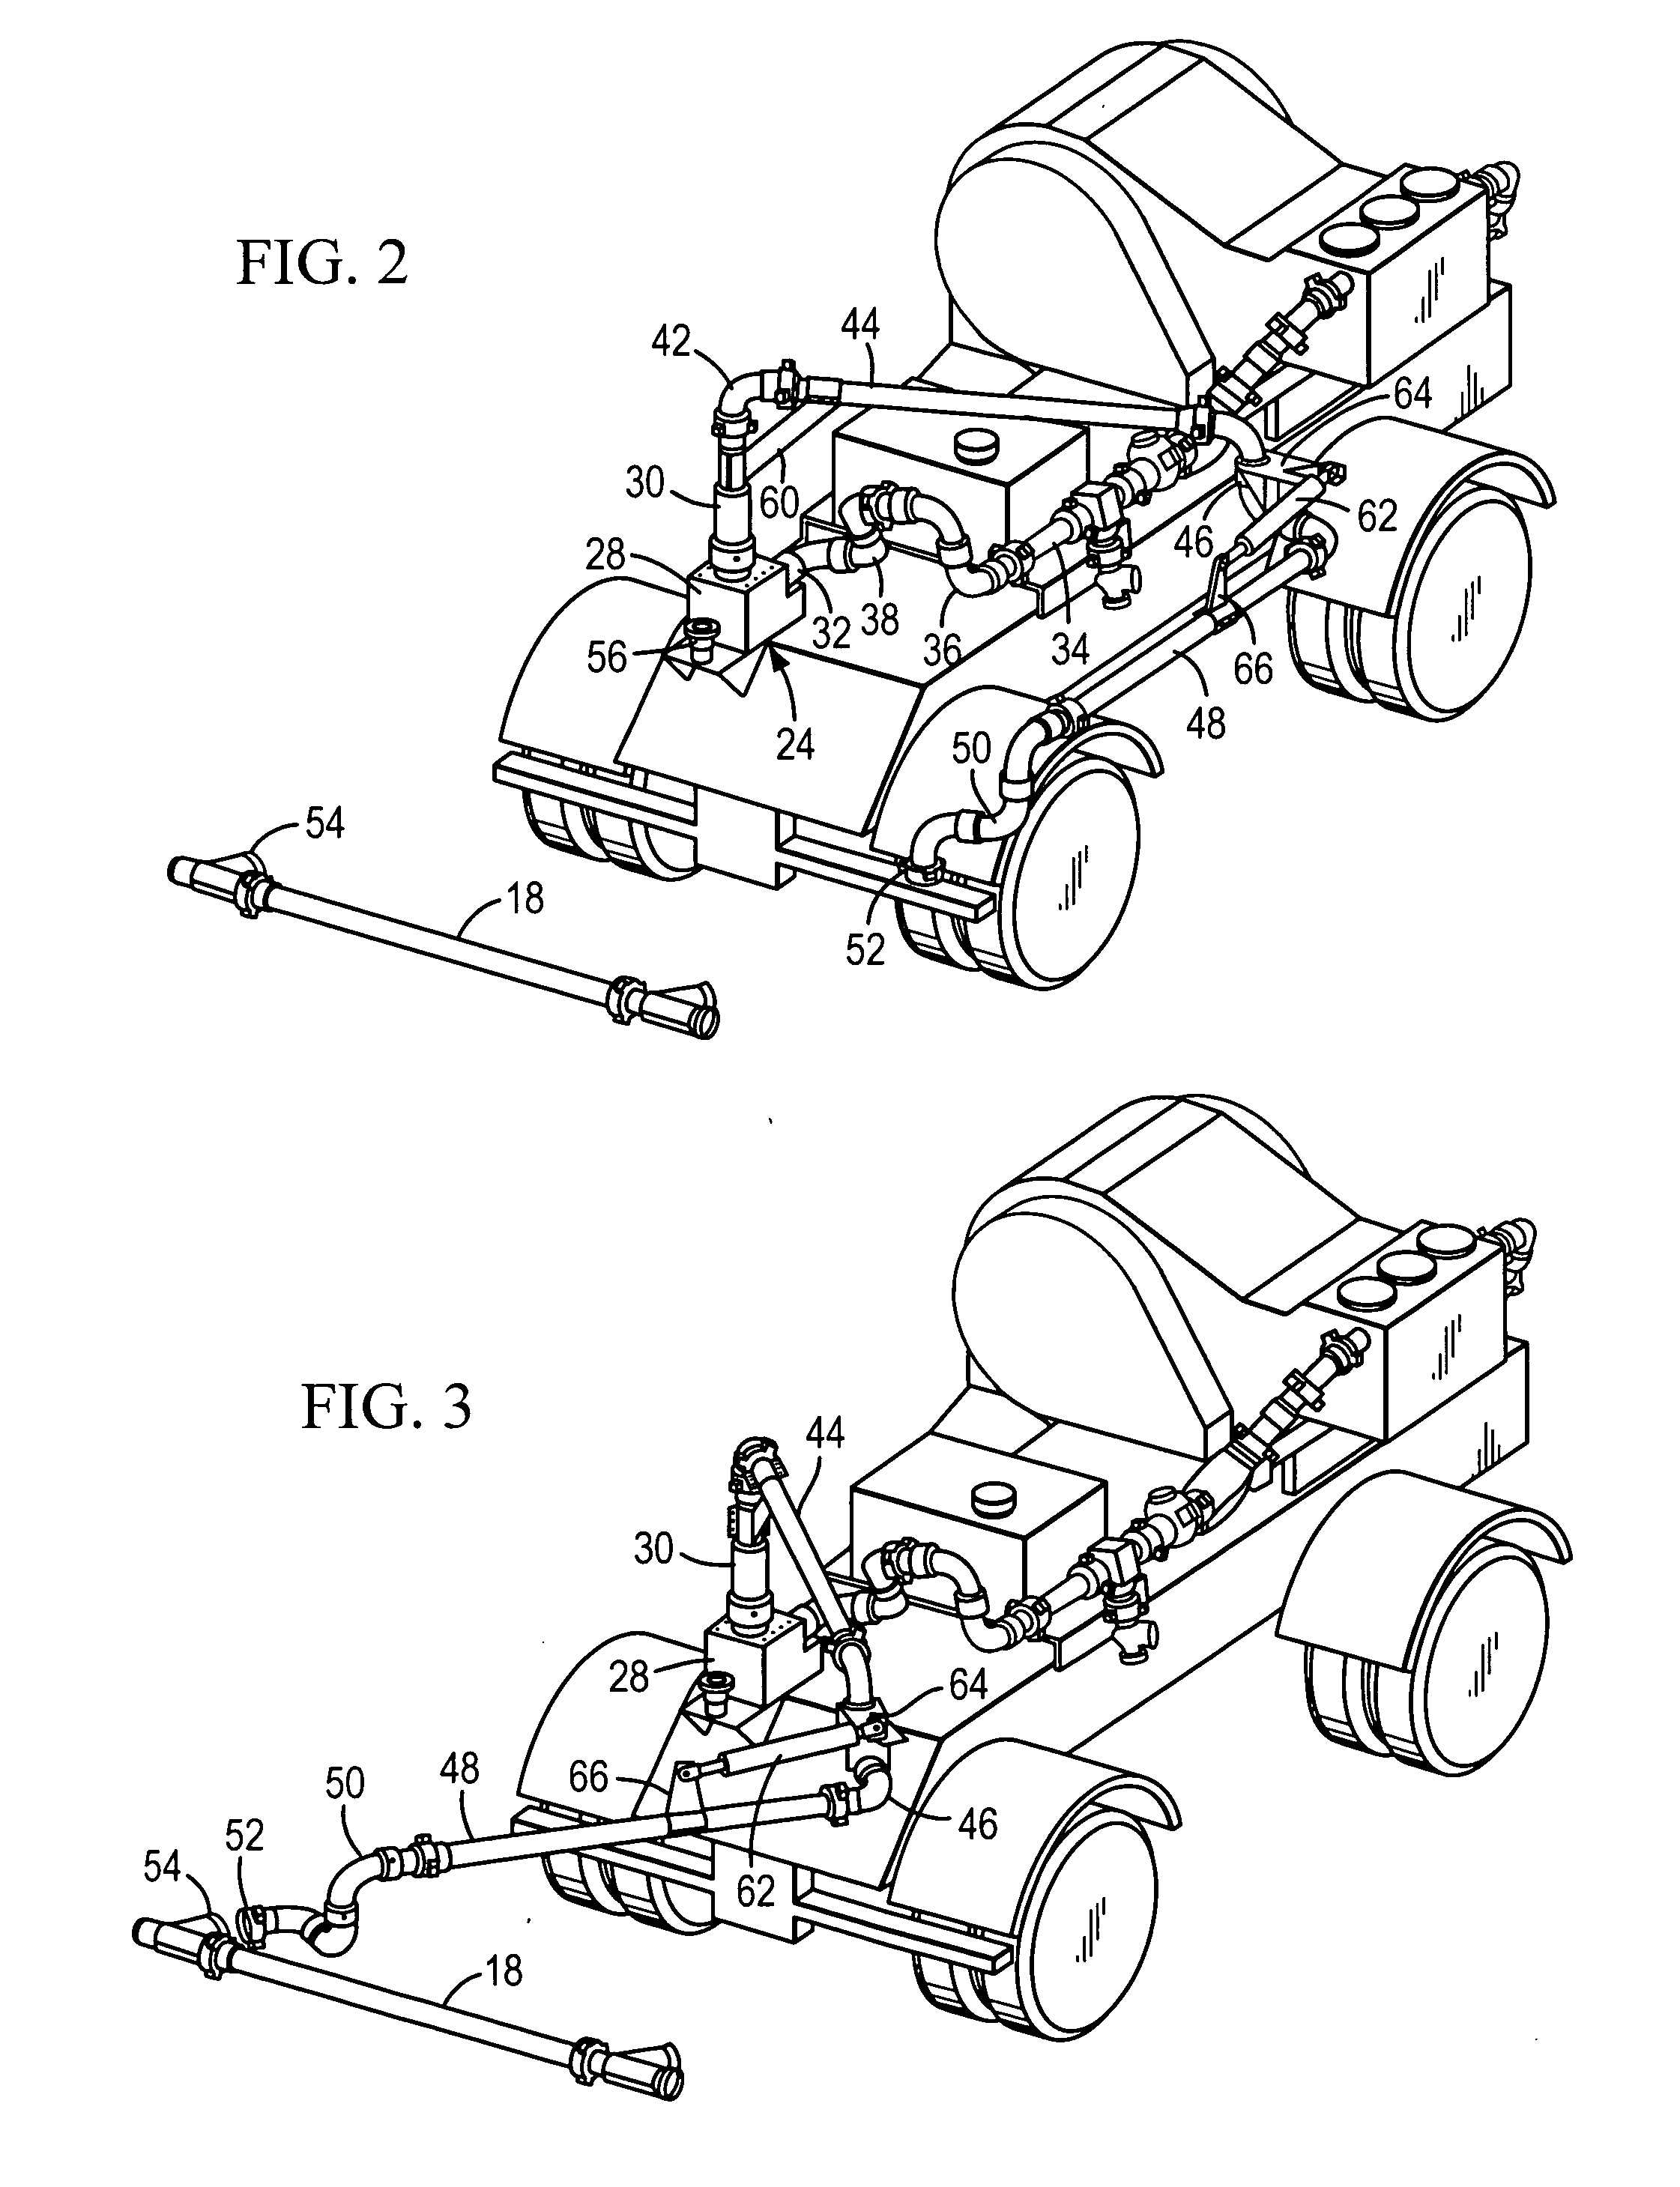 Discharge arm assembly for pumping units